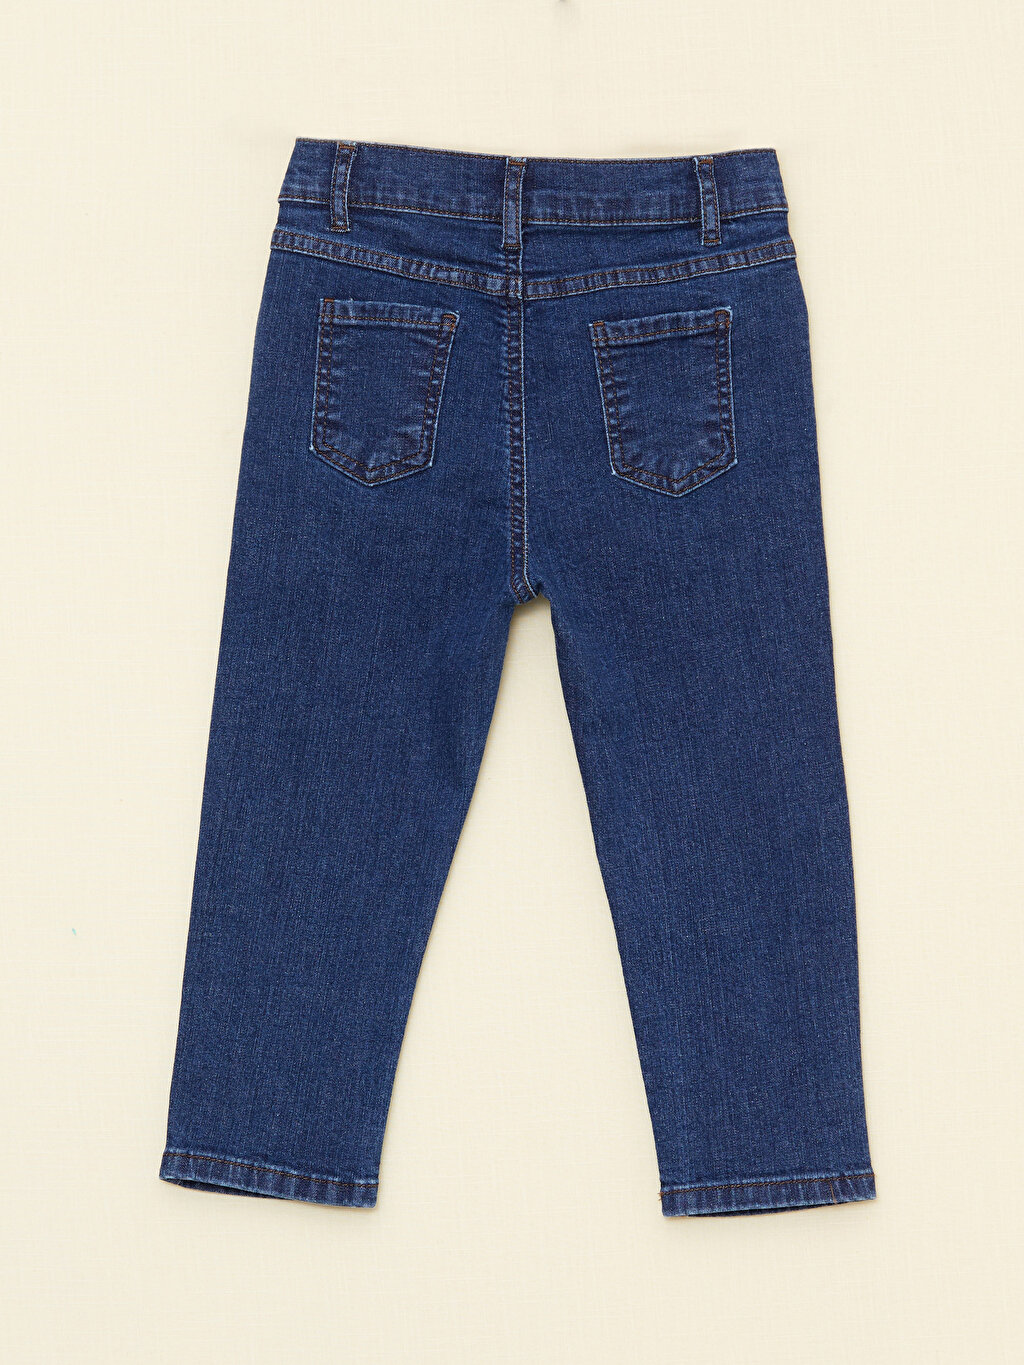 KIDS FASHION Trousers Casual Blue 18-24M Mc baby jeans discount 98% 